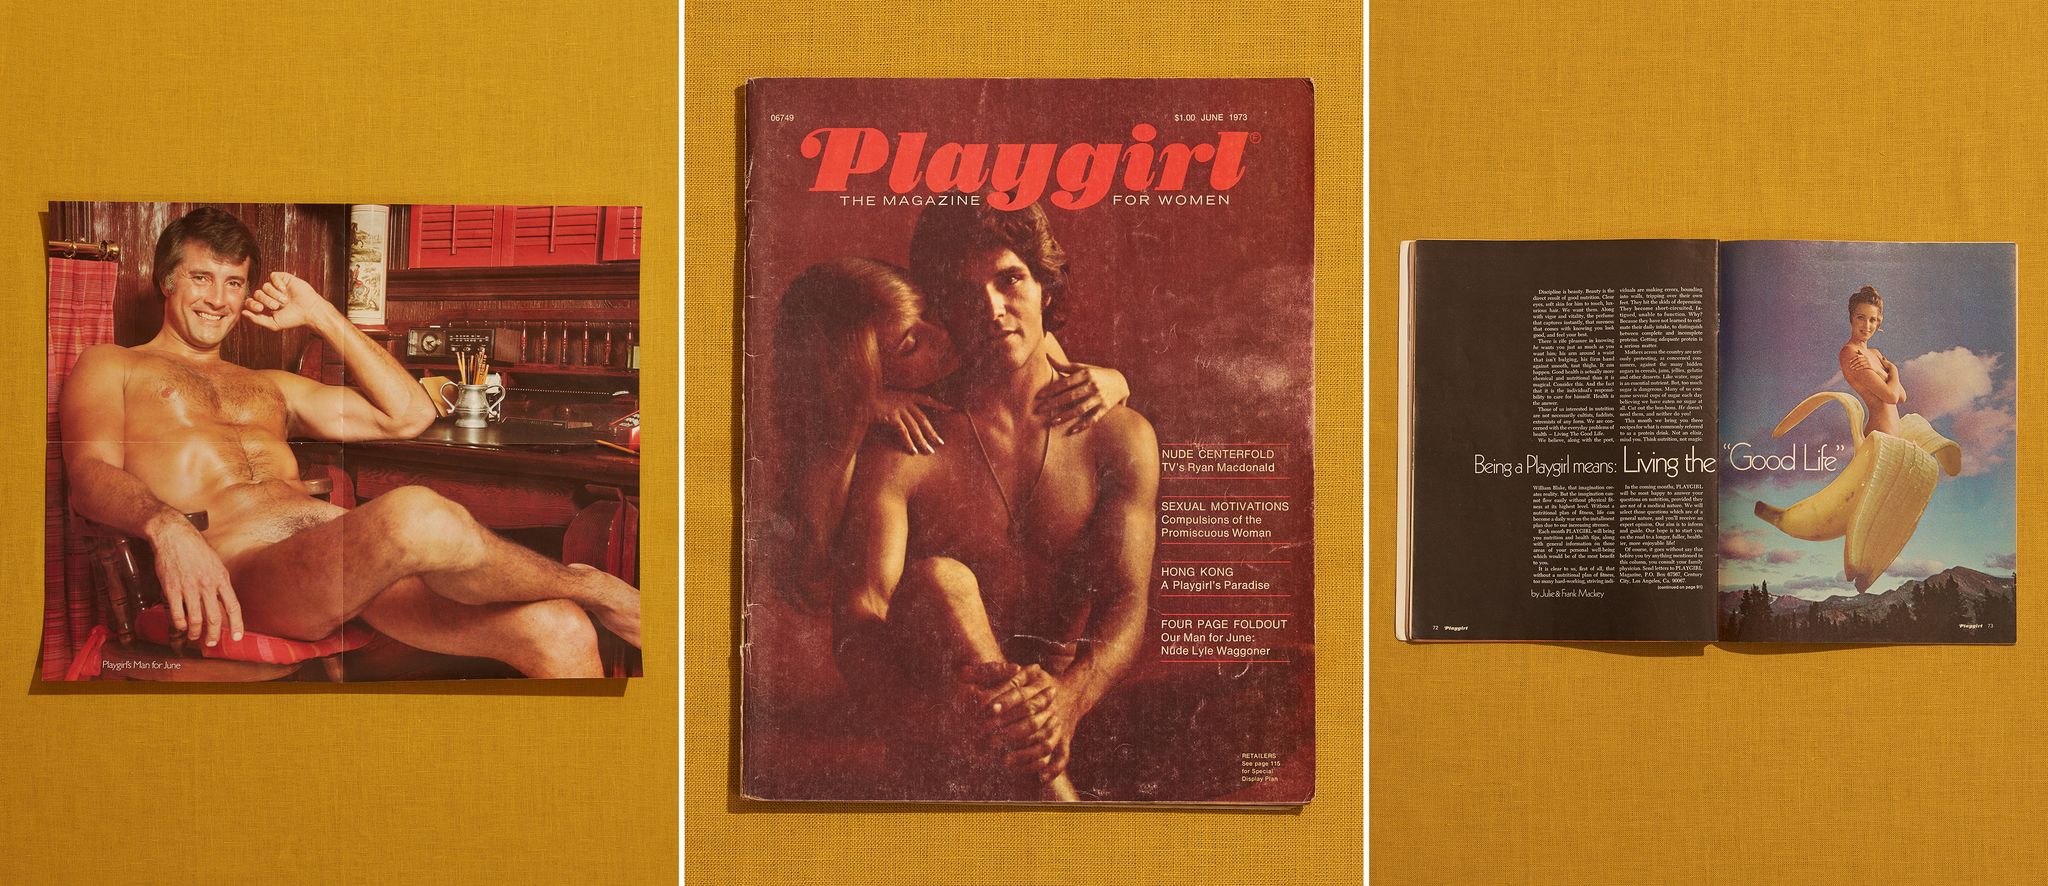 angelika quiane recommends naked straight man on the beach playboy magazine porn pic